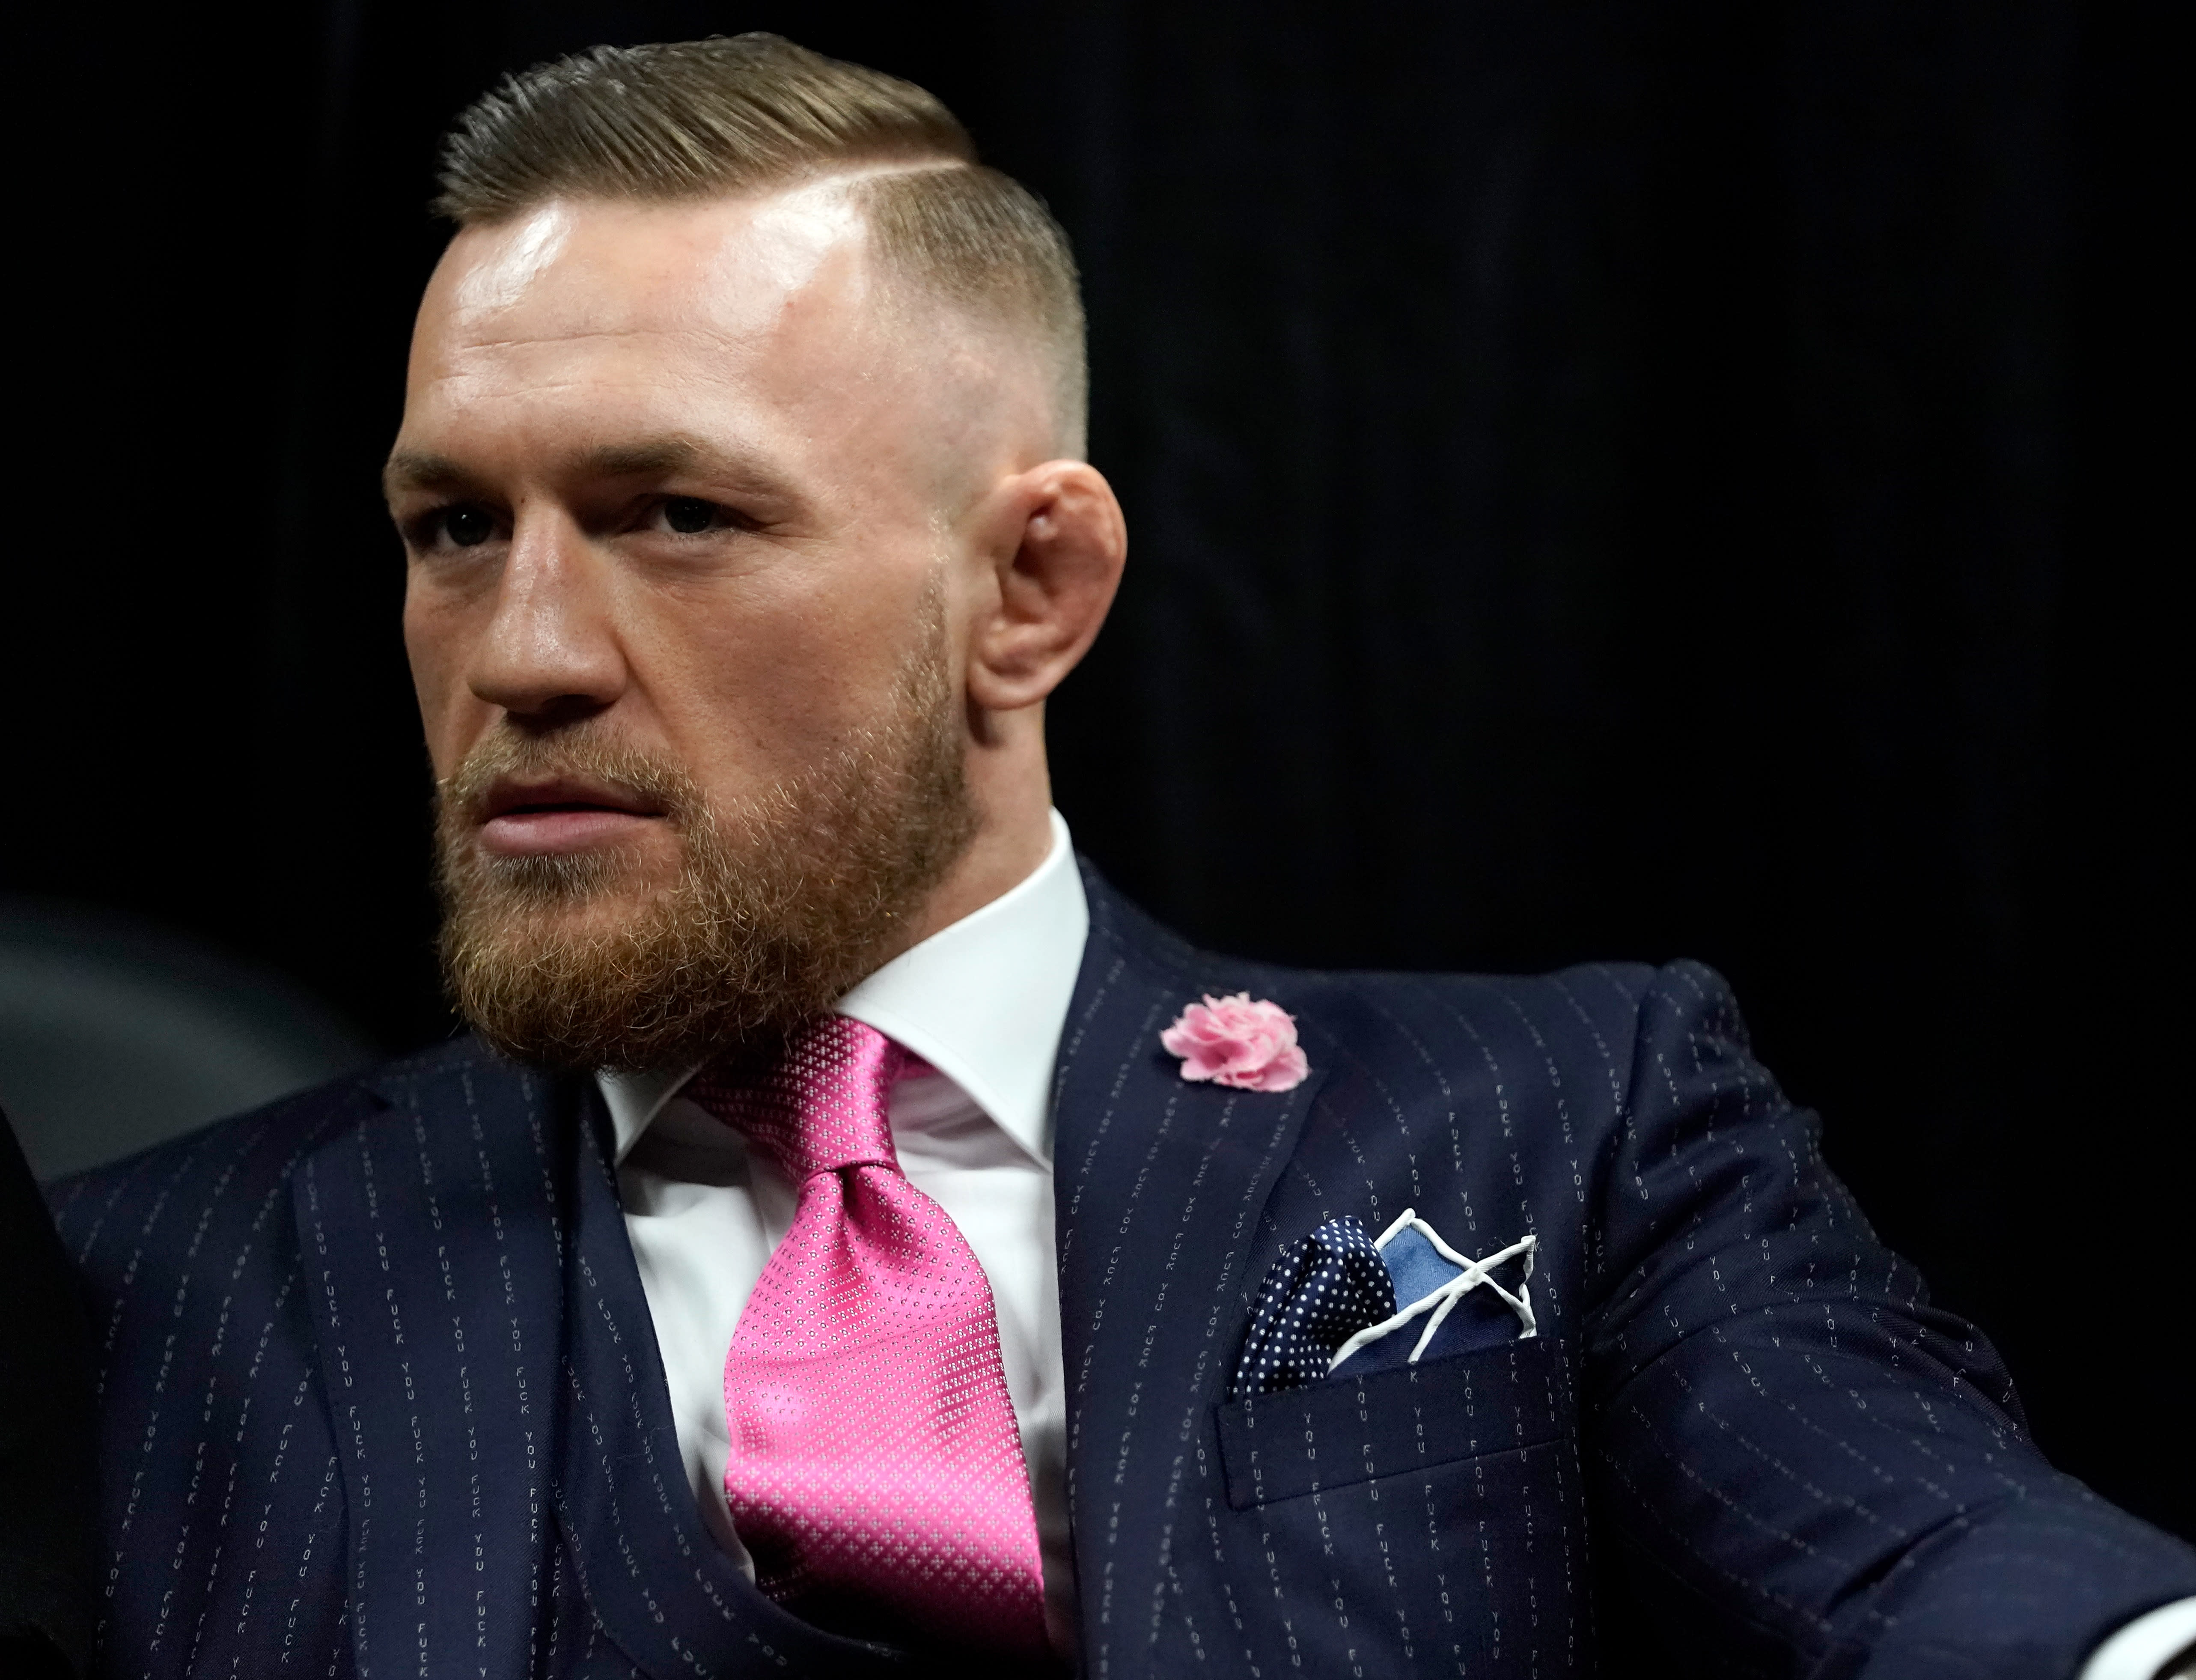 Conor McGregor on tour promoting Floyd Mayweather fight